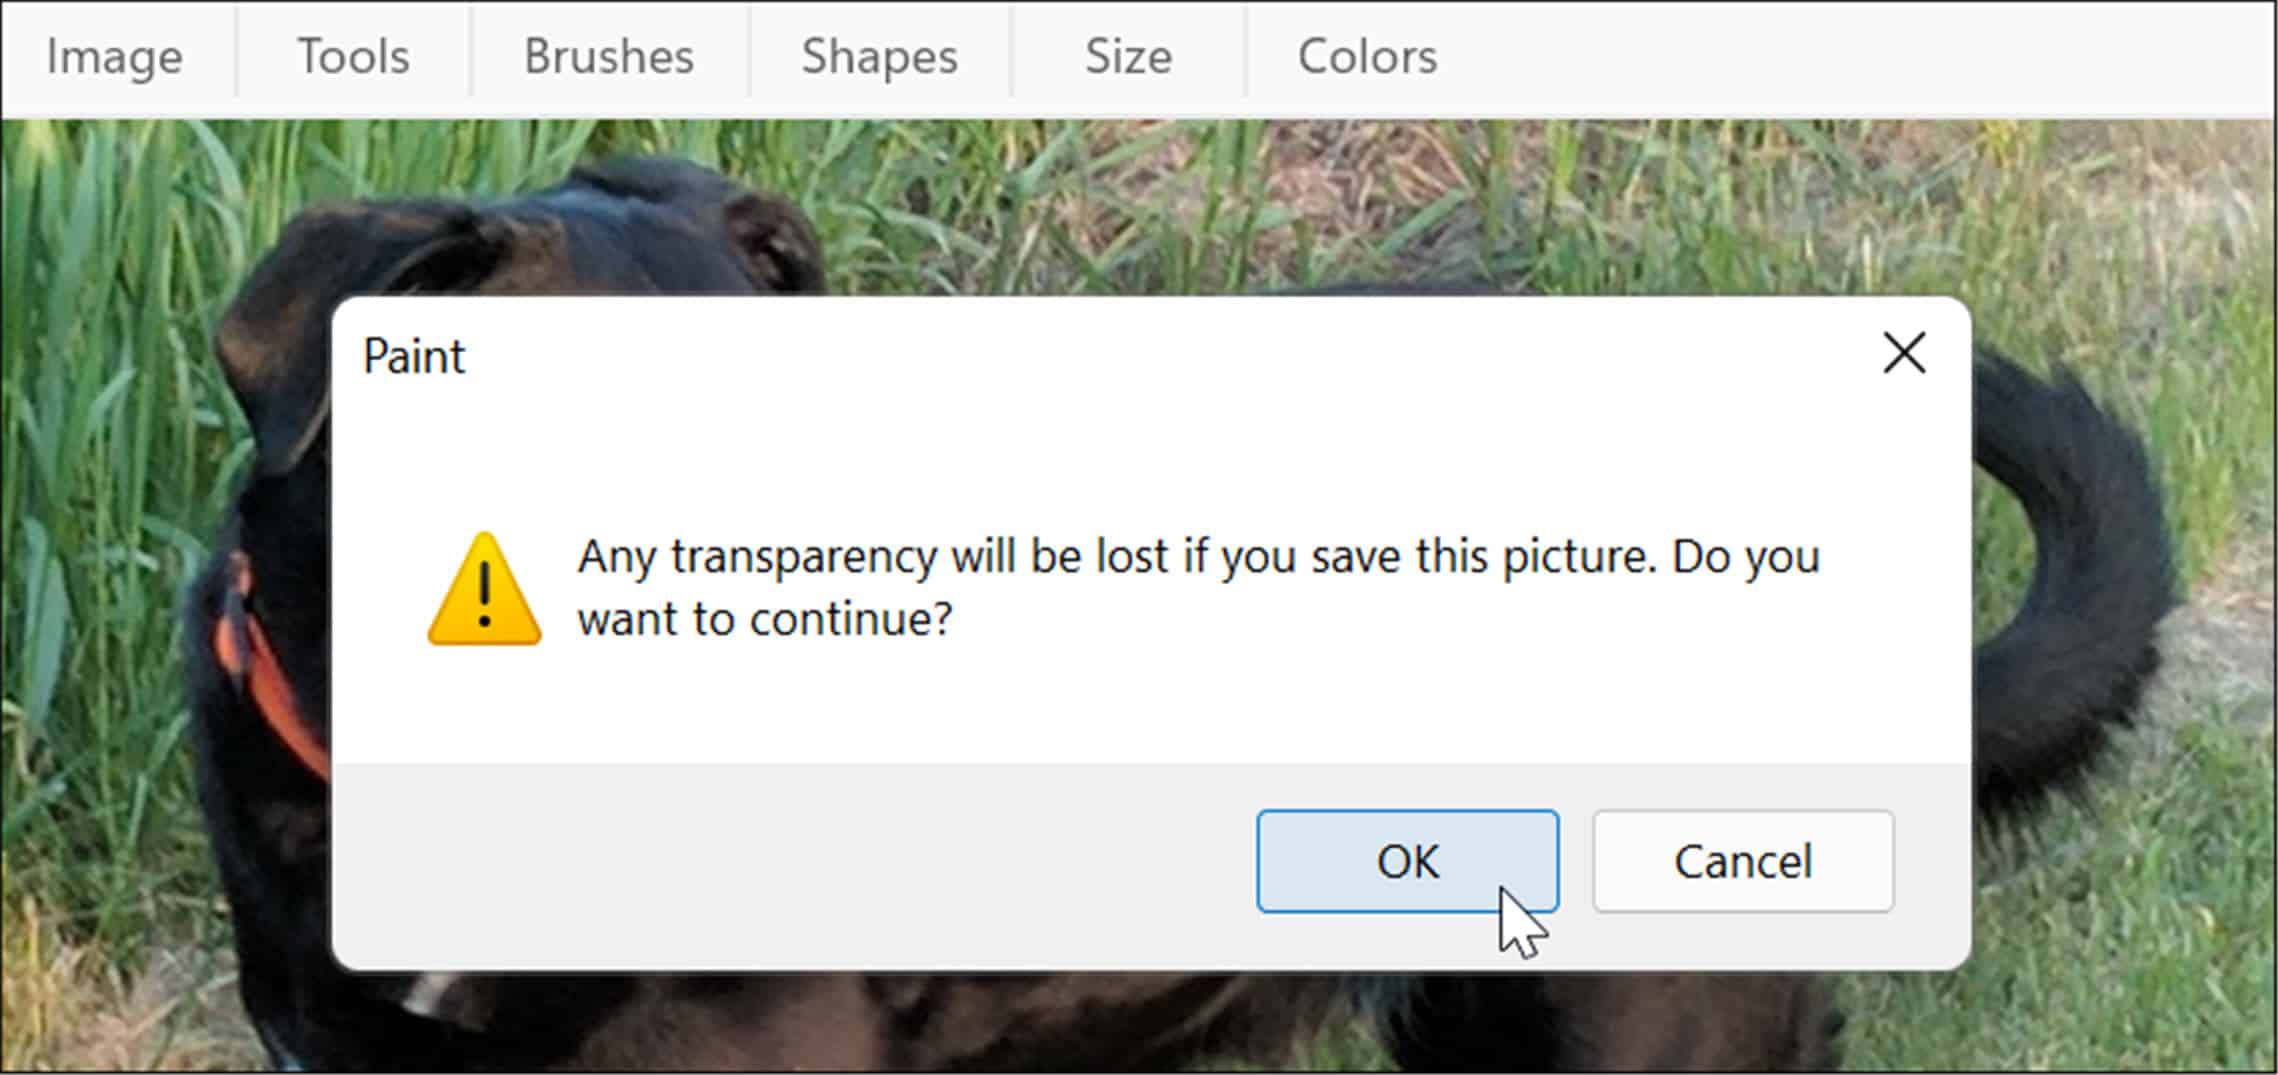 4-transparency-lost-dialog-message